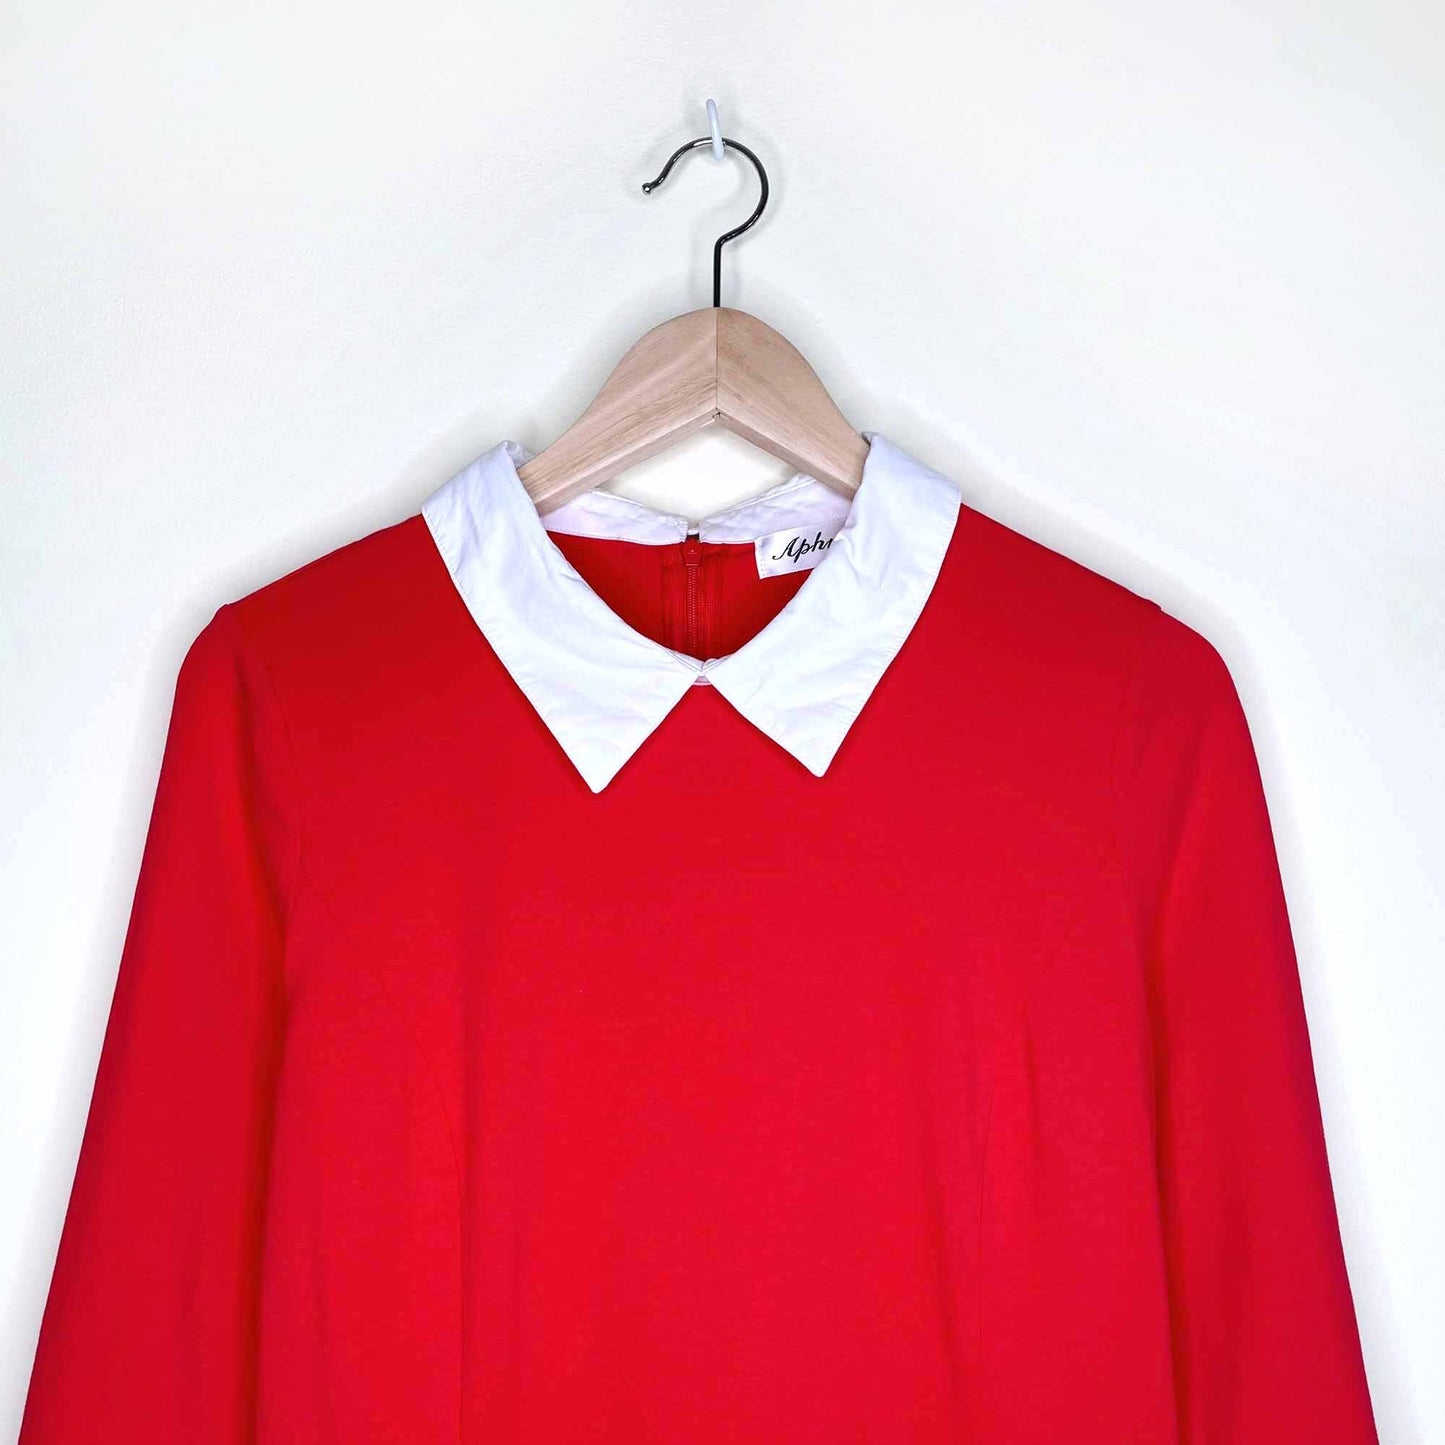 Aphratti red a-line dress with peter pan collar - size Large